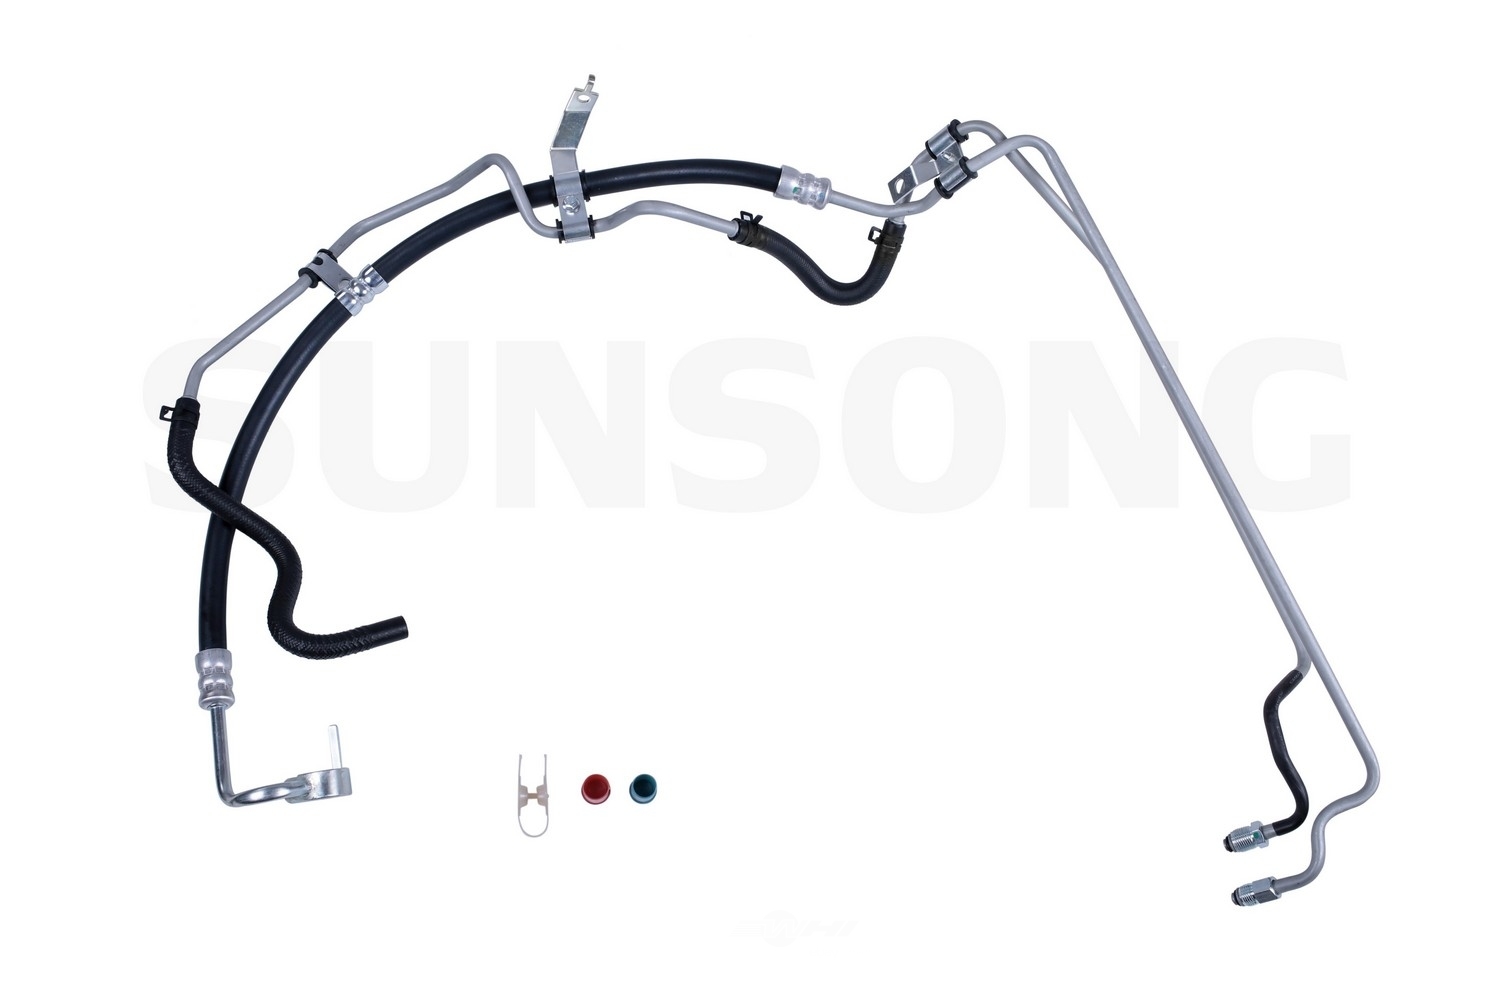 SUNSONG NORTH AMERICA - Power Steering Hose Assembly - SUG 3401256